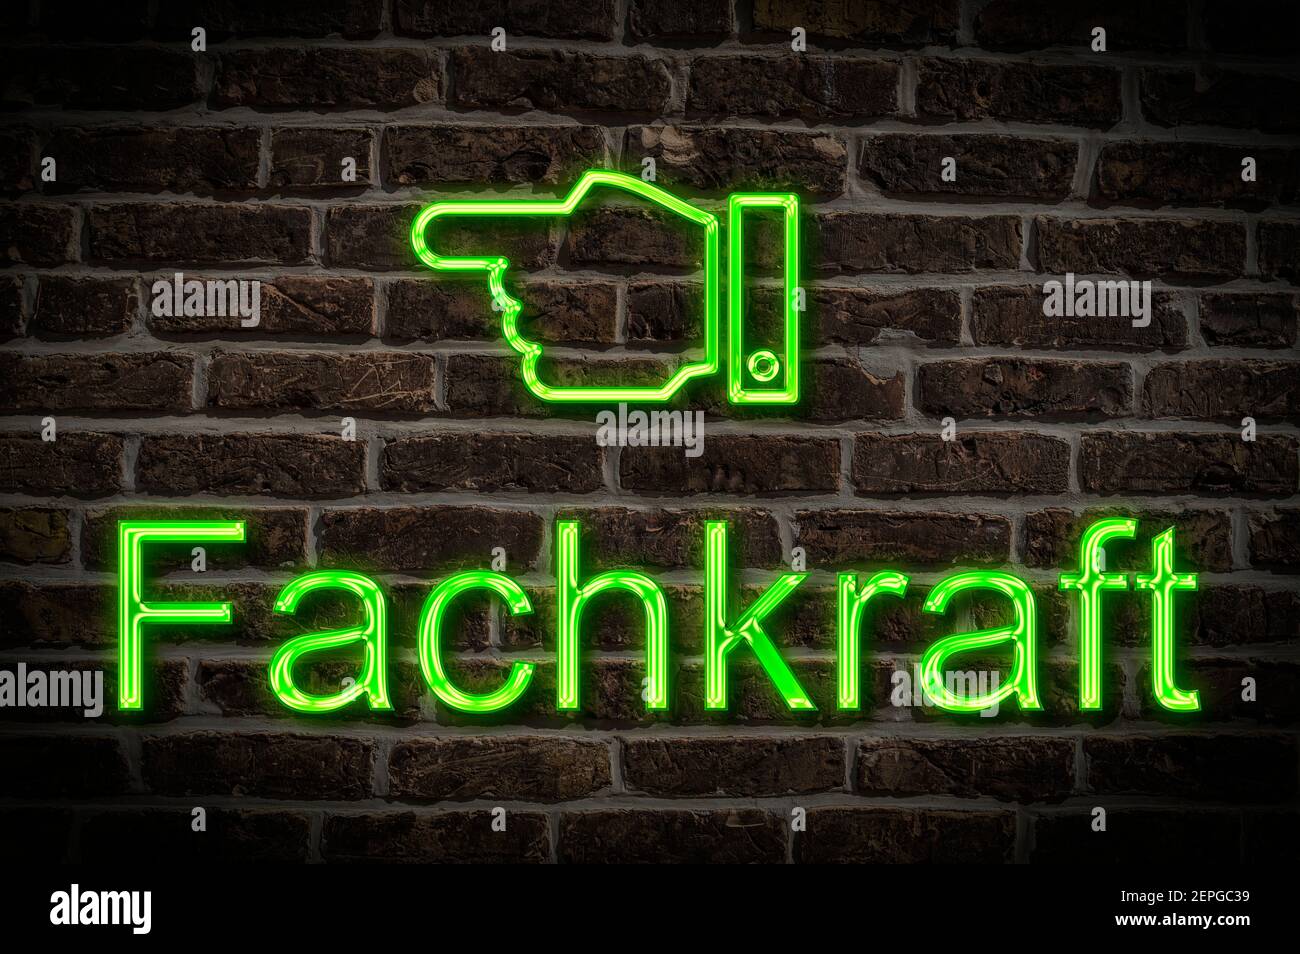 Detail photo of a a neon sign on a wall with the inscription Fachkraft (Specialist) Stock Photo